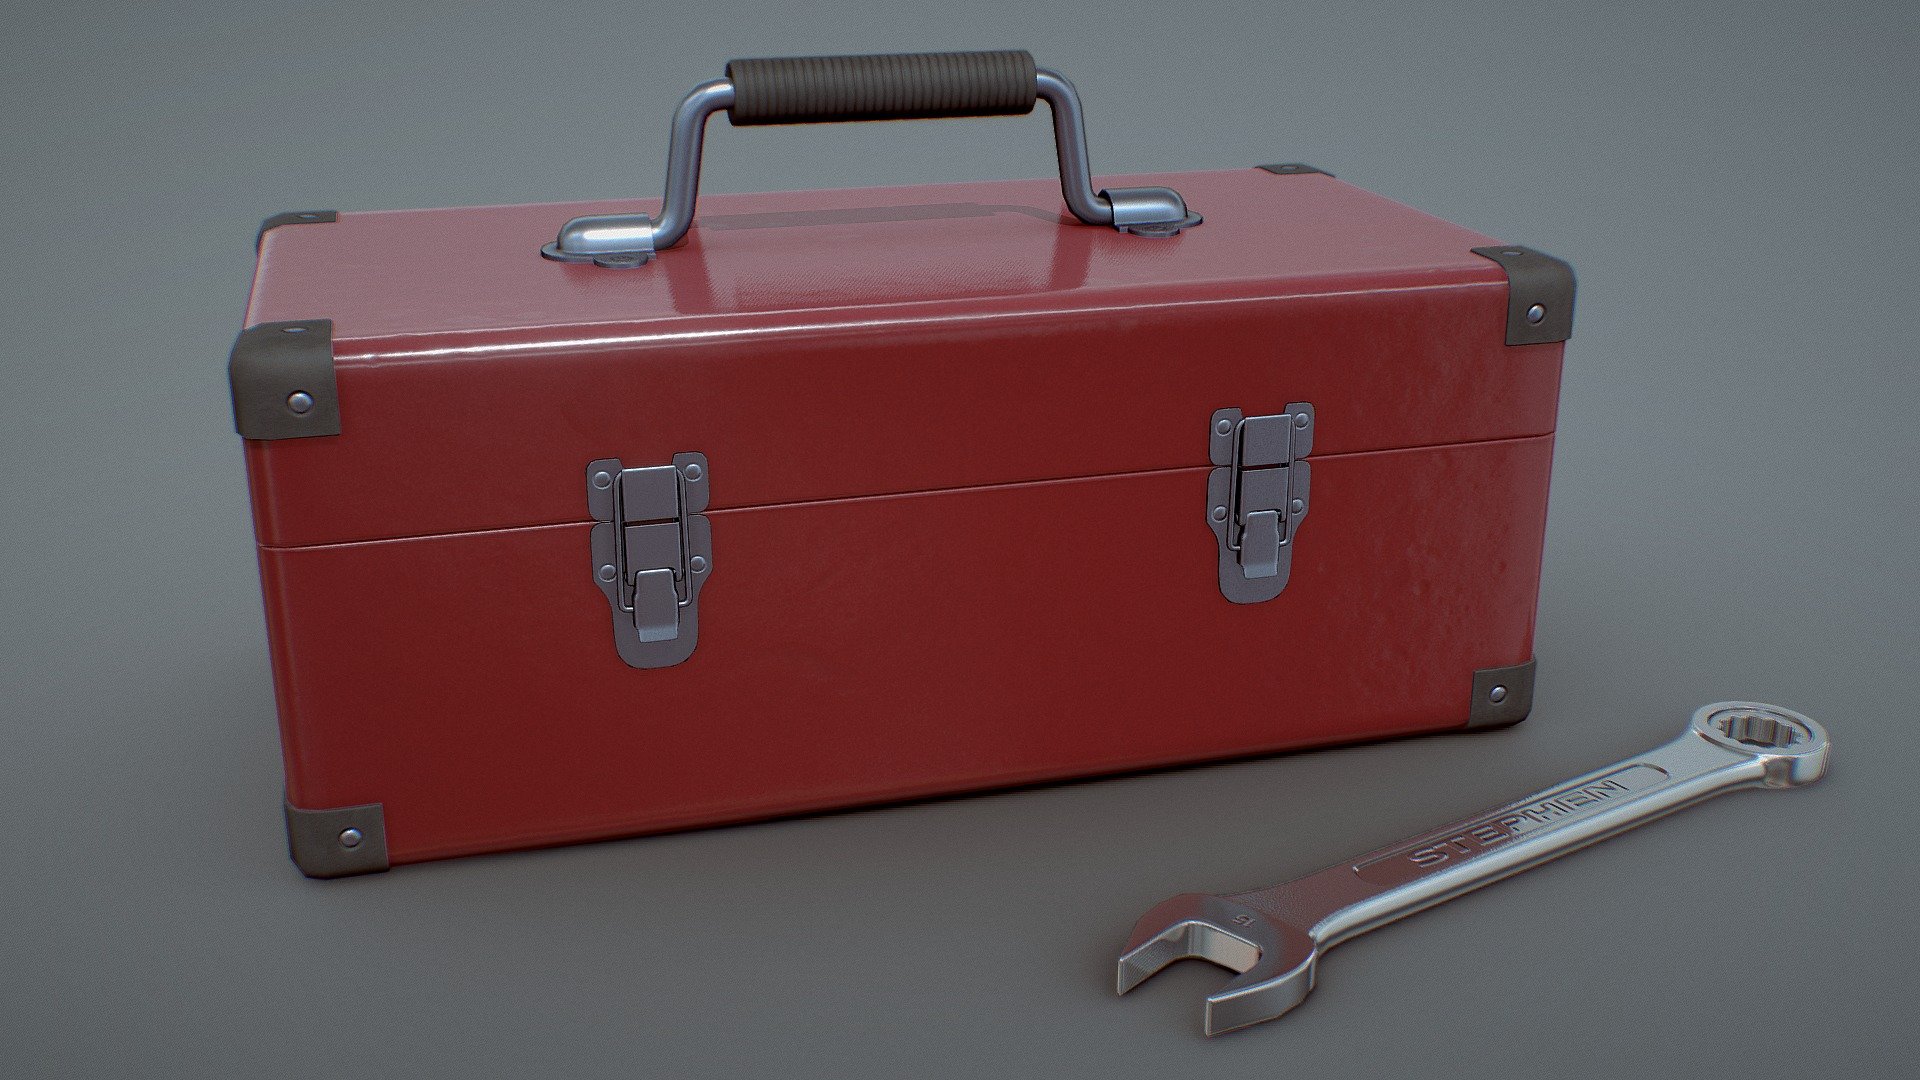 11,240 triangles (total), toolbox = 9,640 tris and wrench = 1,600 tris

2 materials/texture sets (one material per object)

2k maps

Optimized props for real-time rendering/games
 - Toolbox & Wrench (low poly) - 3D model by Latuska90 (@FourtyNights) 3d model